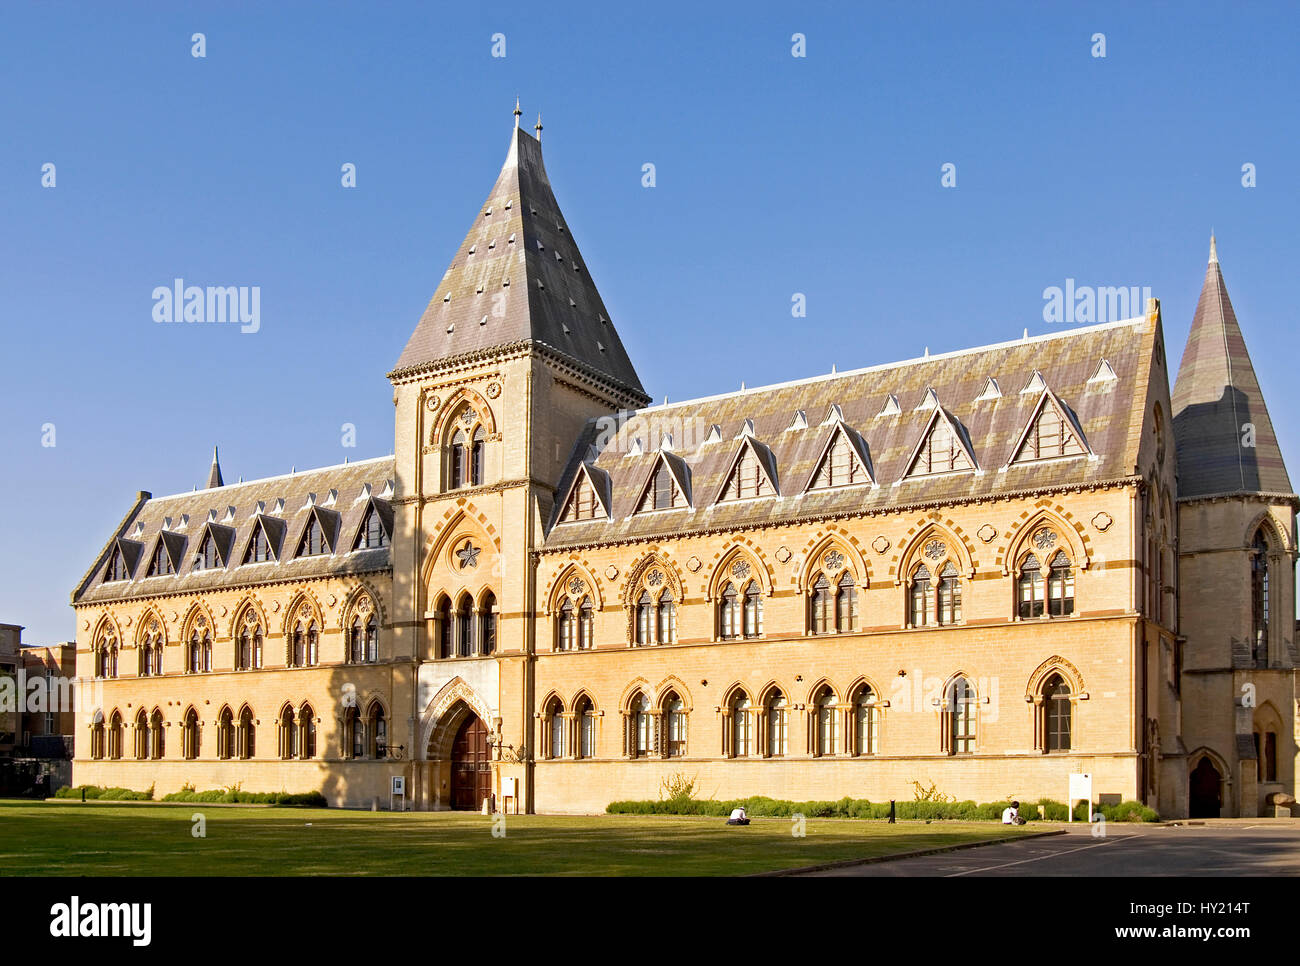 The Oxford University Museum of Natural History offers a impressive Exhibition of zoological and geological collections.  Das Oxford University Museum Stock Photo